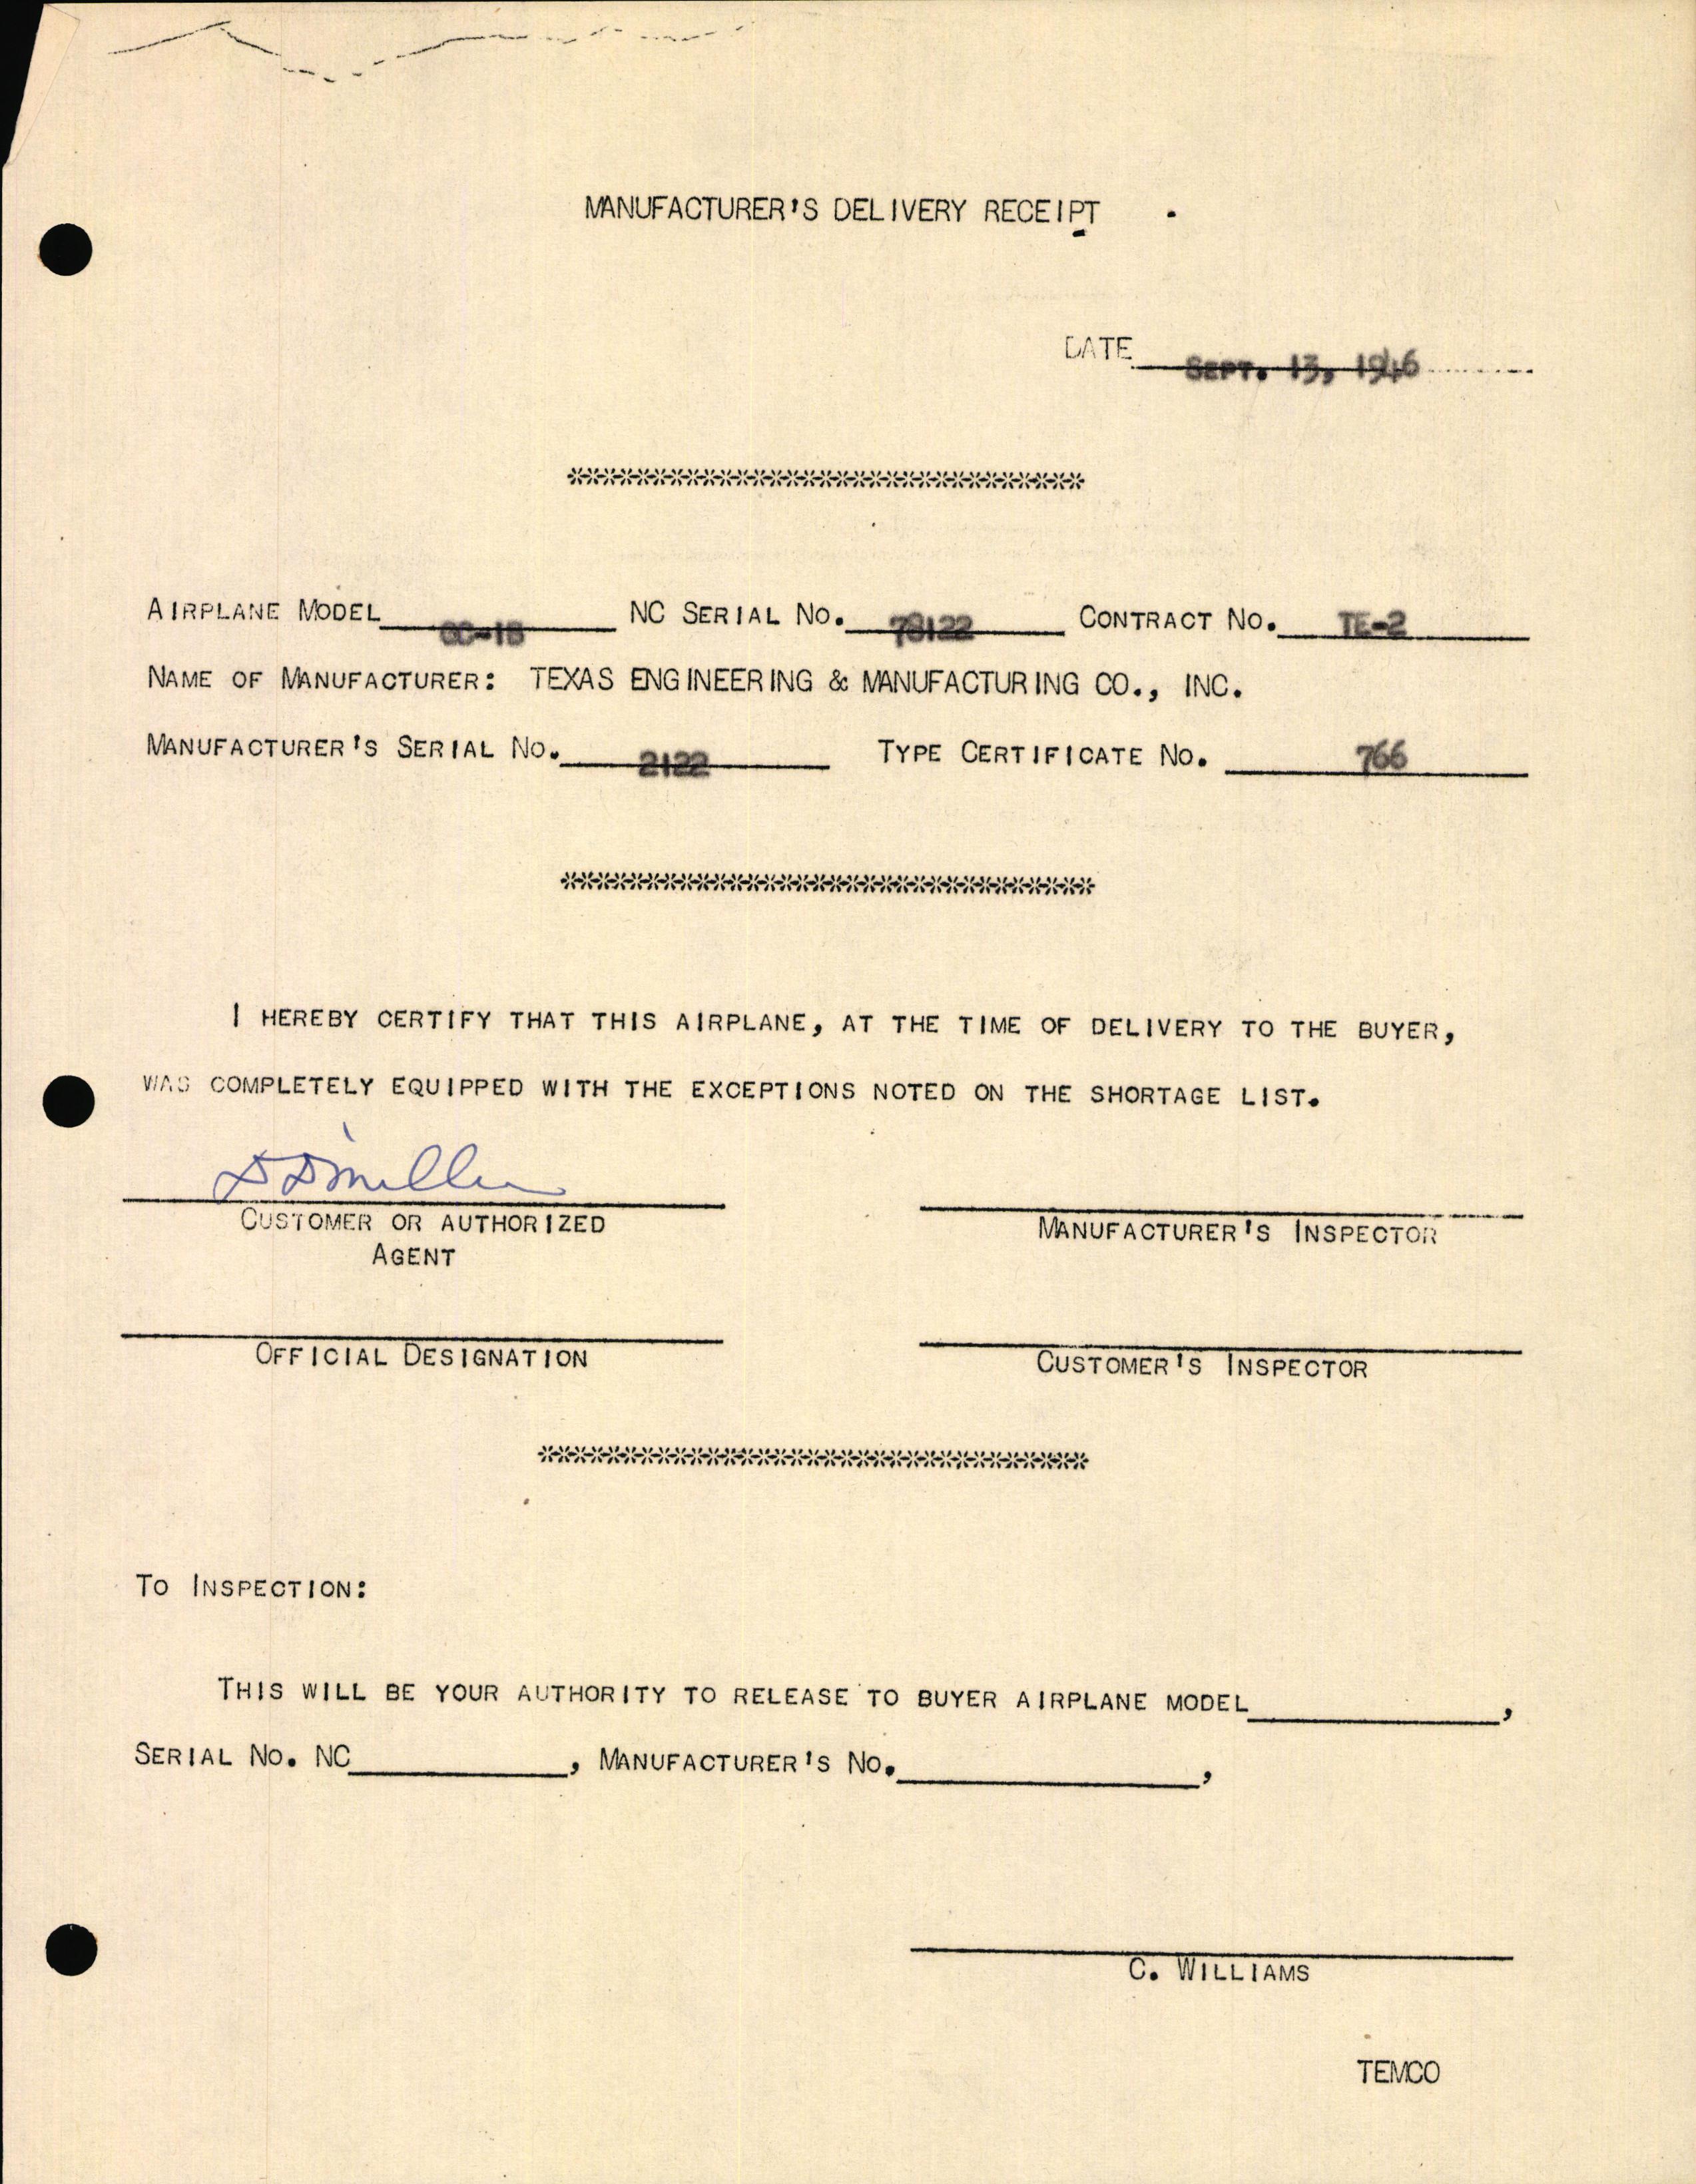 Sample page 3 from AirCorps Library document: Technical Information for Serial Number 2122